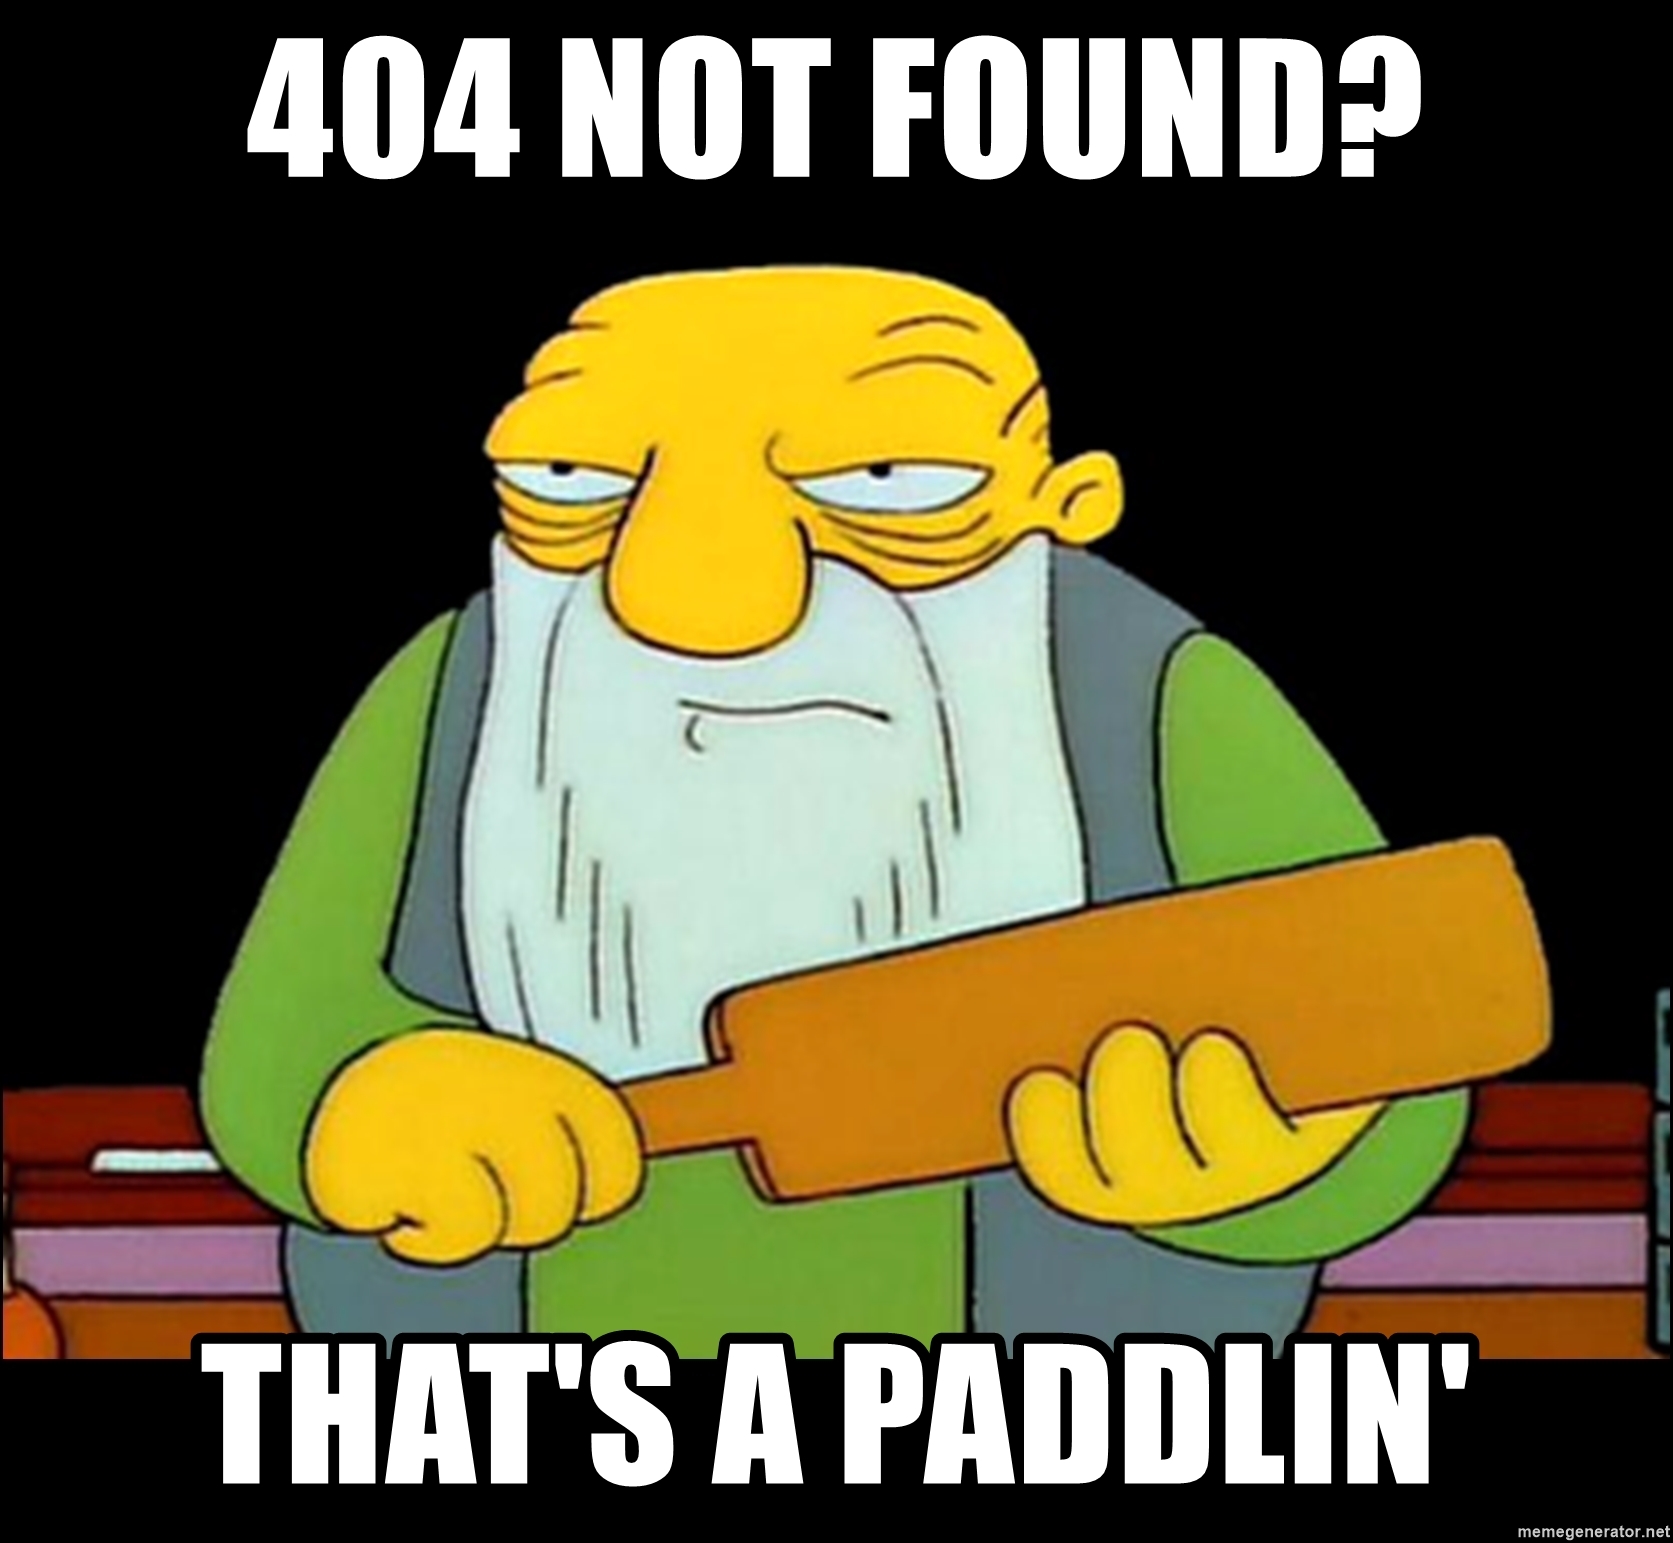 404 Not Found?  That's a paddlin'